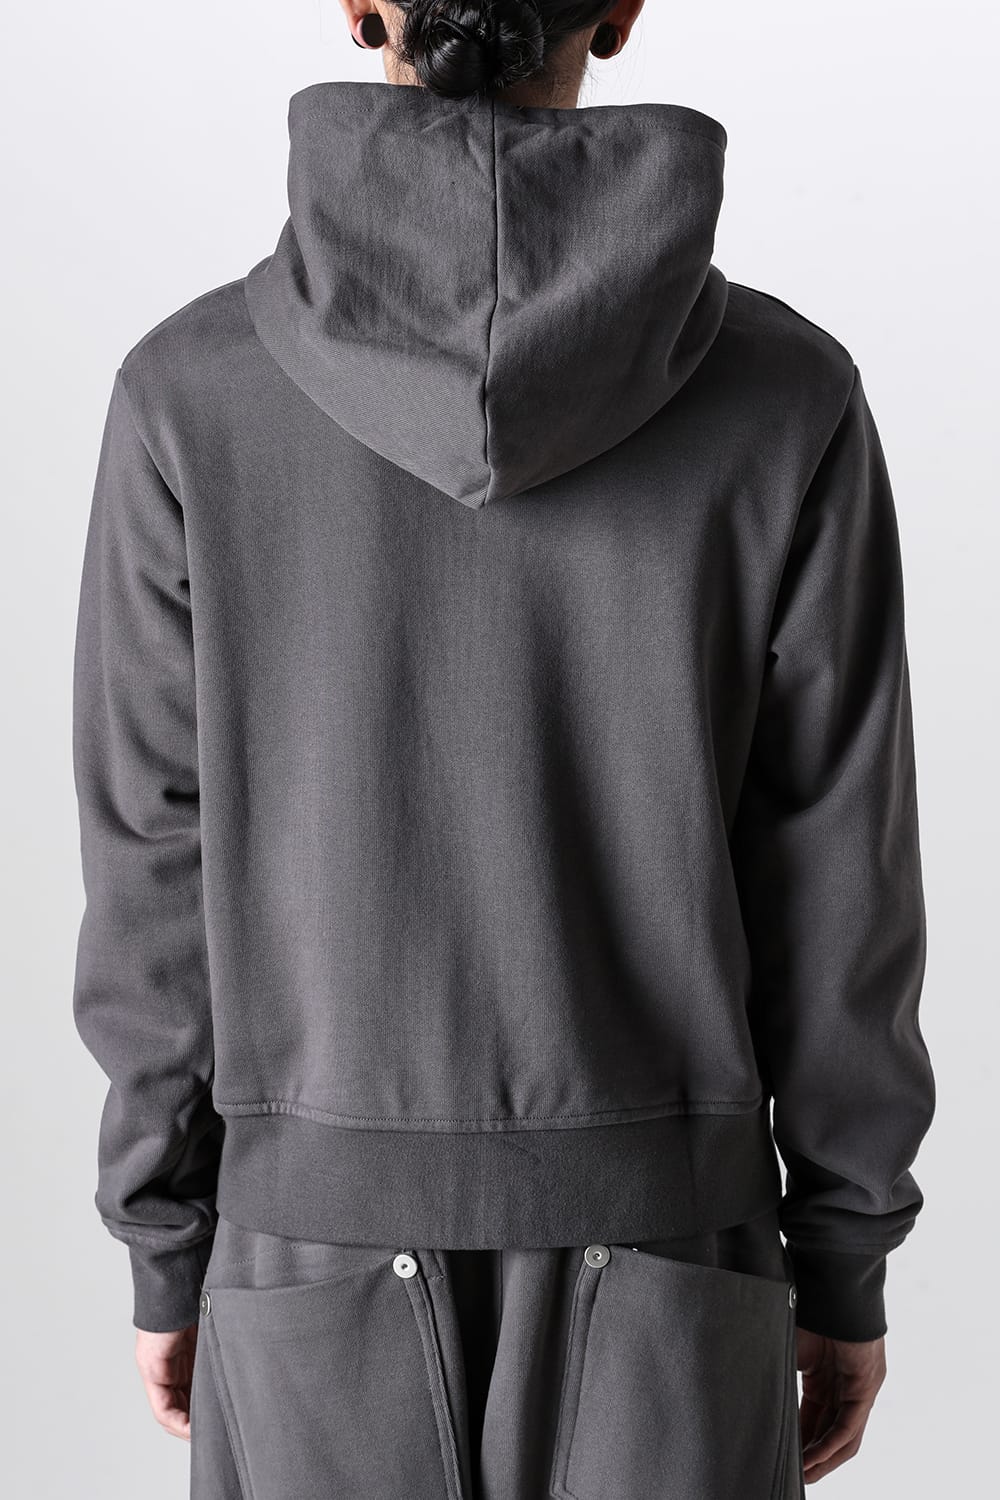 AW23-JER-103-02 | Full Zipped Hoodie Cotton Jersey | Omar Afridi 